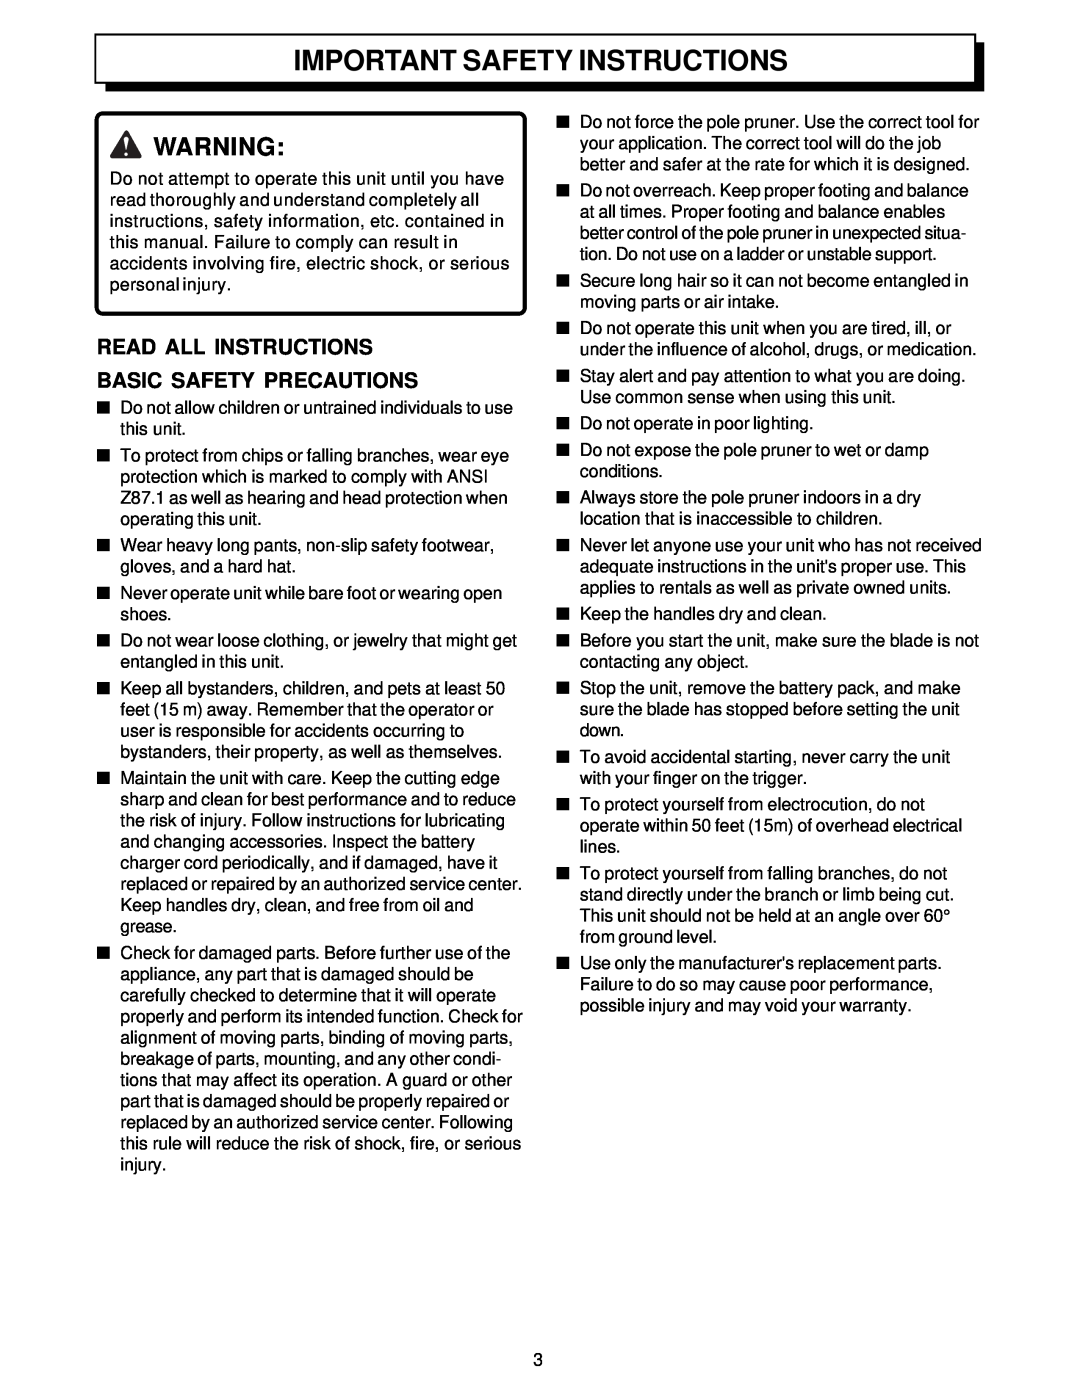 Homelite UT34020 manual Important Safety Instructions, Read All Instructions Basic Safety Precautions 